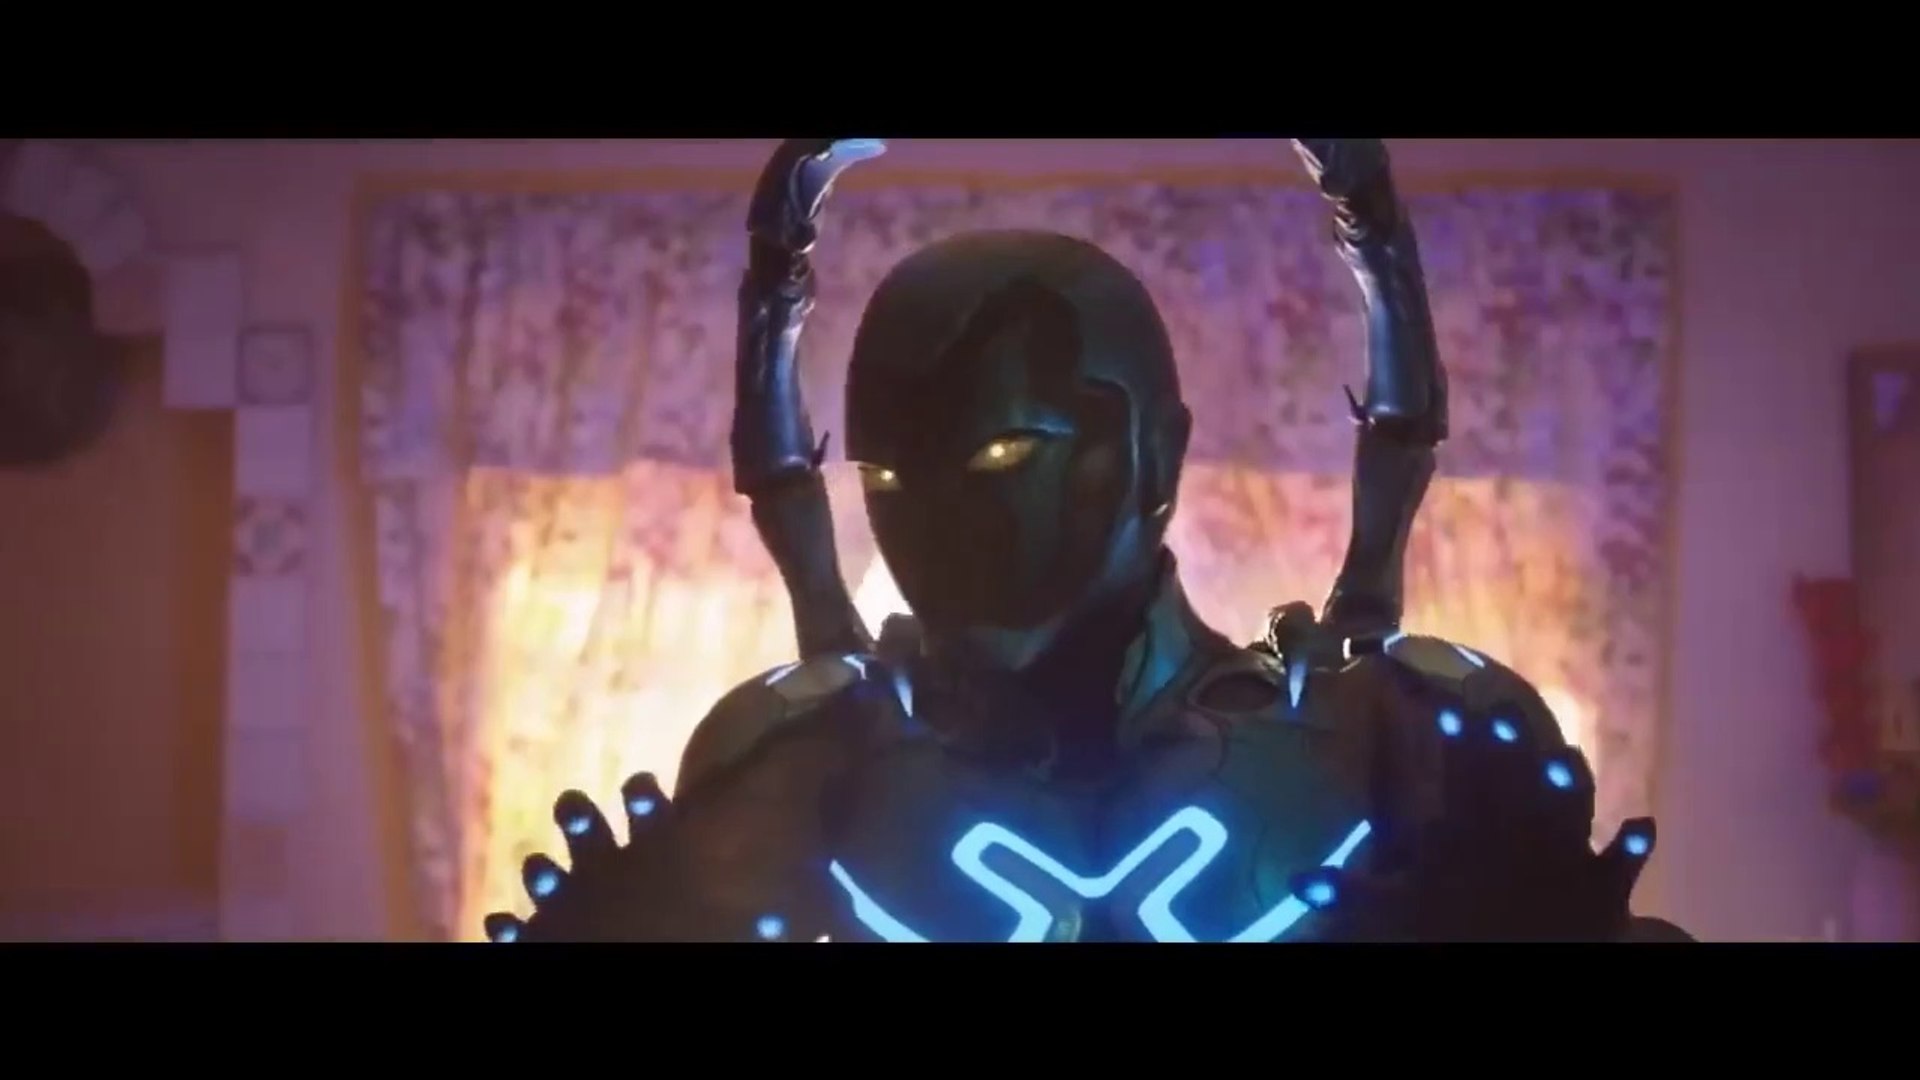 Blue Beetle - DC Movie - Official Trailer, film trailer, Watch the first  trailer for #BlueBeetle, starring Xolo Maridueña. The new DC superhero  movie premieres in theaters on August 18., By Rotten Tomatoes